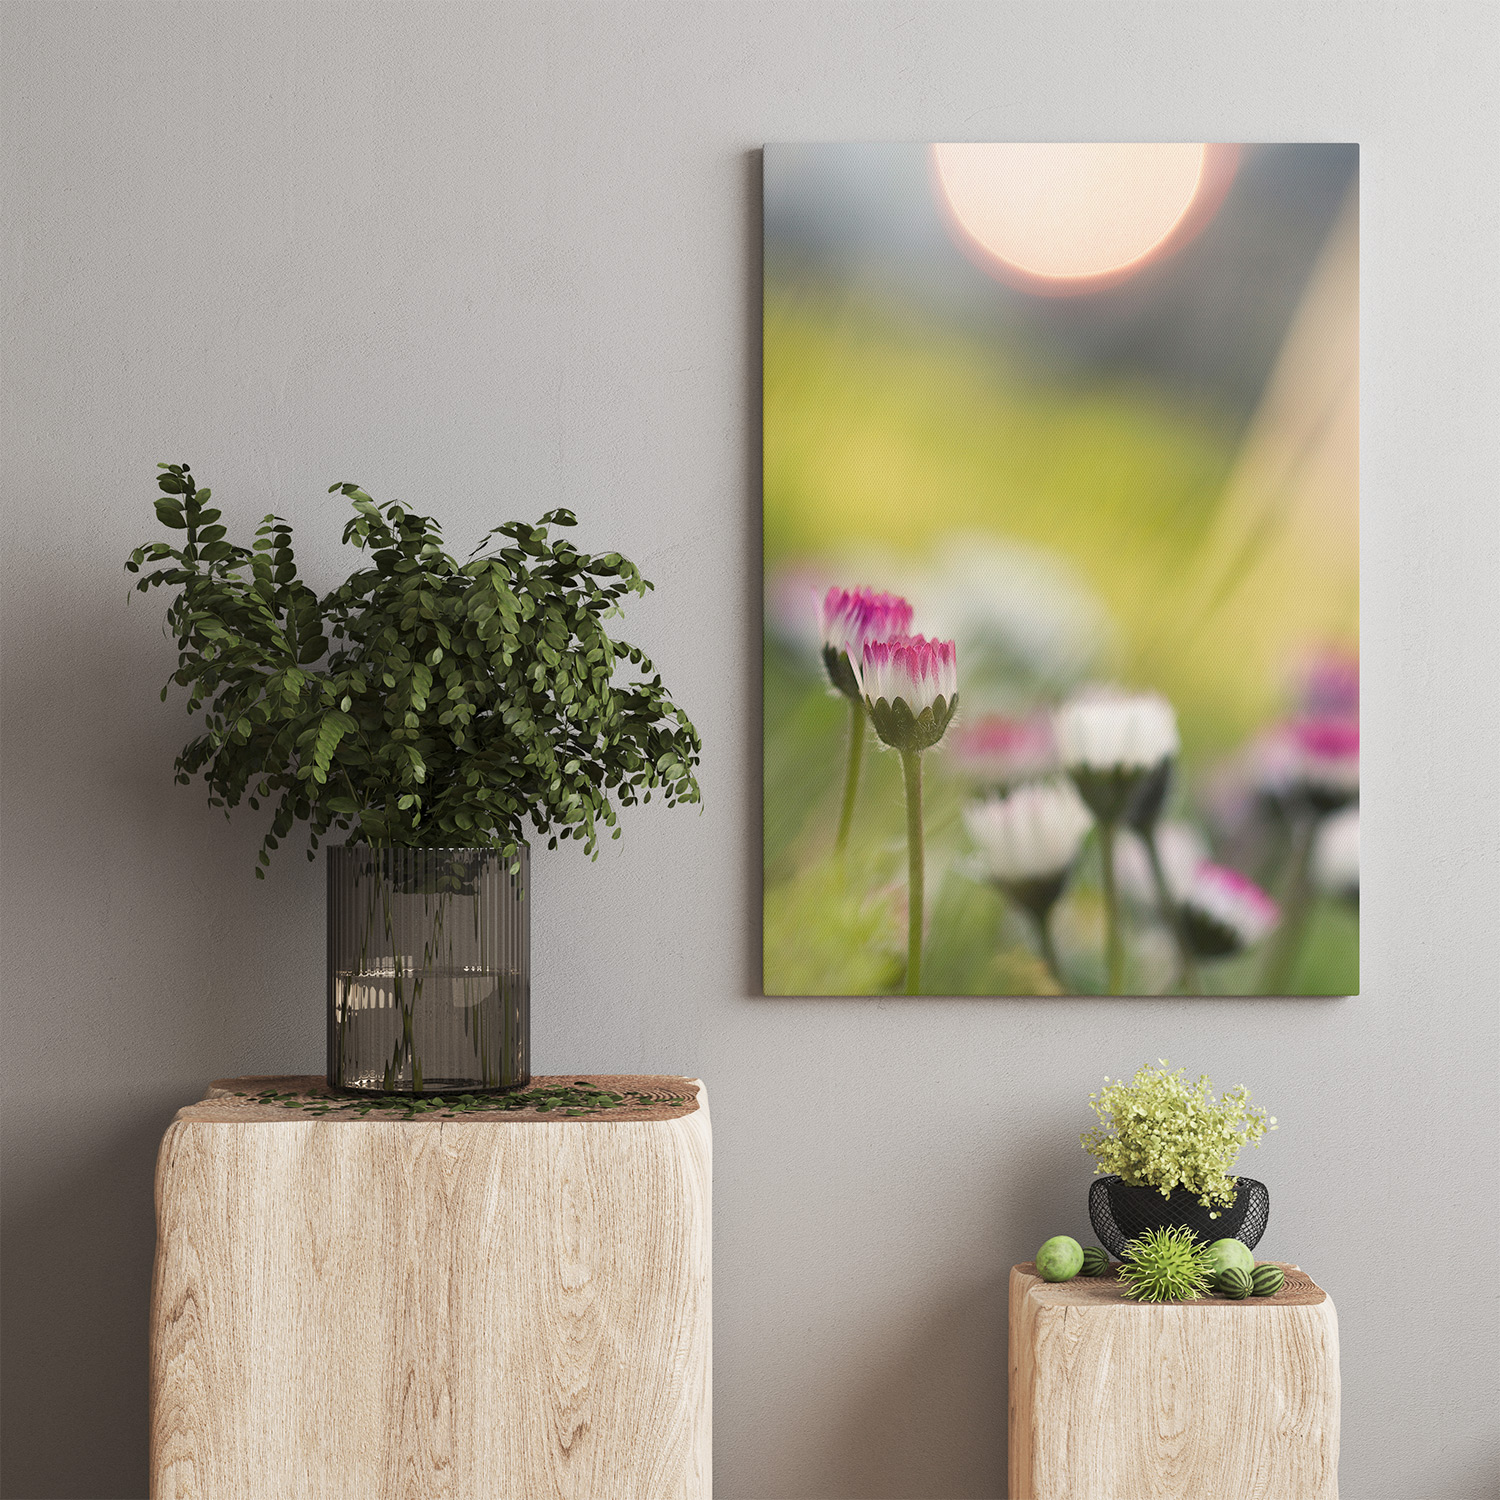 Living room mockup featuring wall art canvas with daisy flowers titled 'Whispered Sweetness.' Two wooden stands with ornamental green plants flank the canvas.